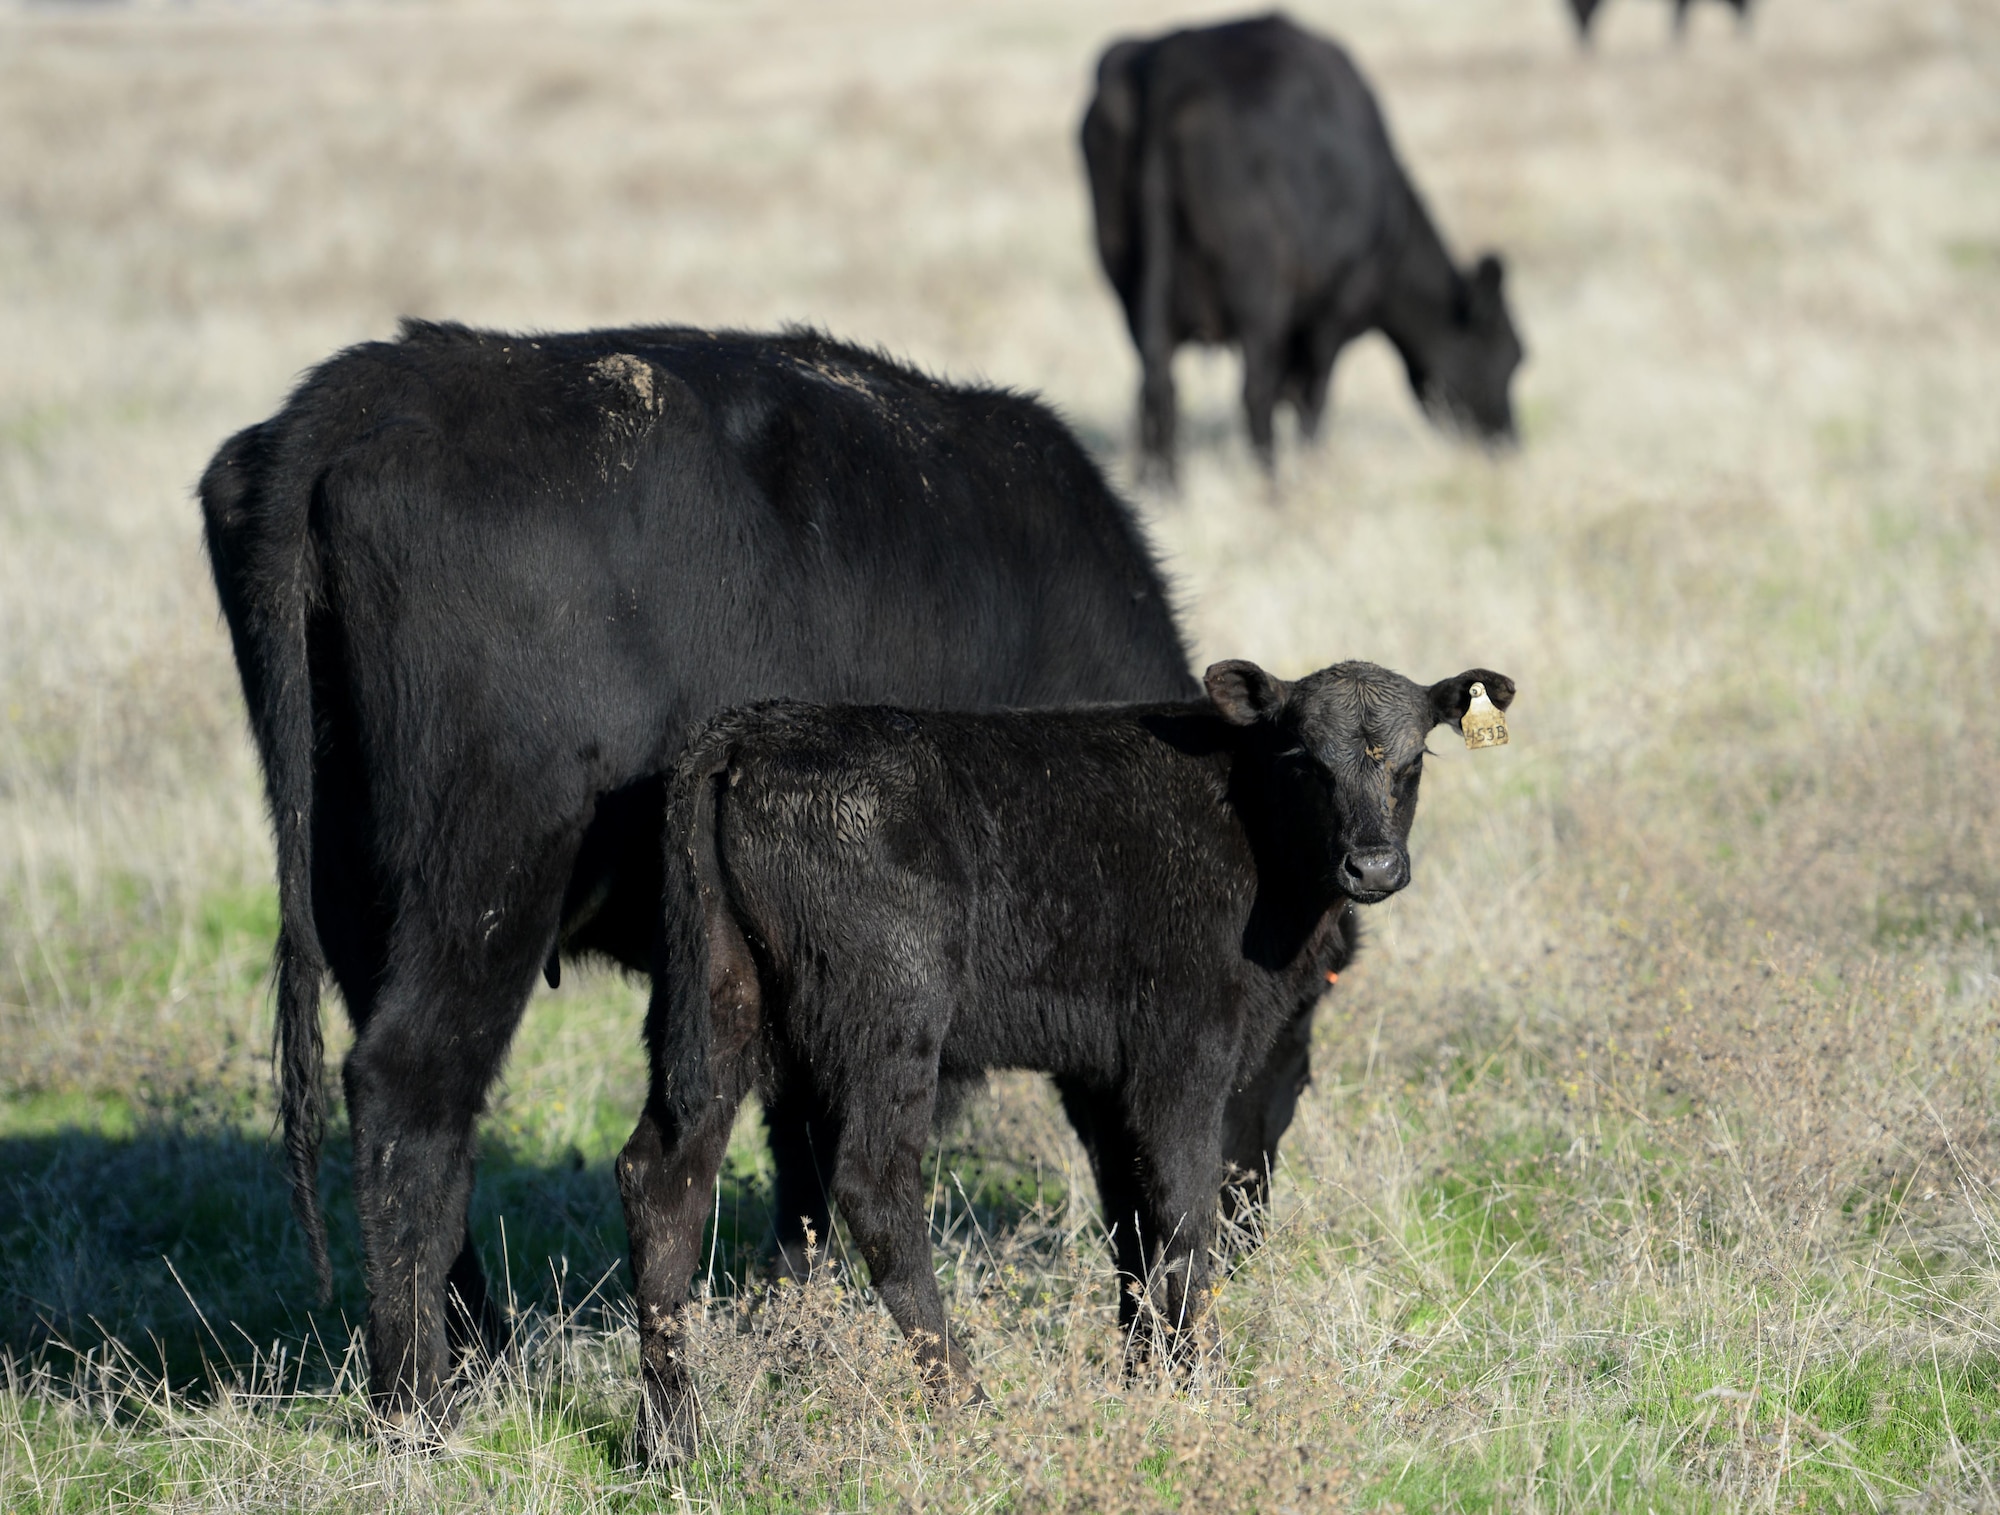 A calf pauses from grazing in a pasture on Beale Air Force Base, California, Nov. 14, 2016. Beale leases 12,000 acres for cattle to graze on during the winter and spring months. (U.S. Air Force photo/Airman Tristan D. Viglianco)